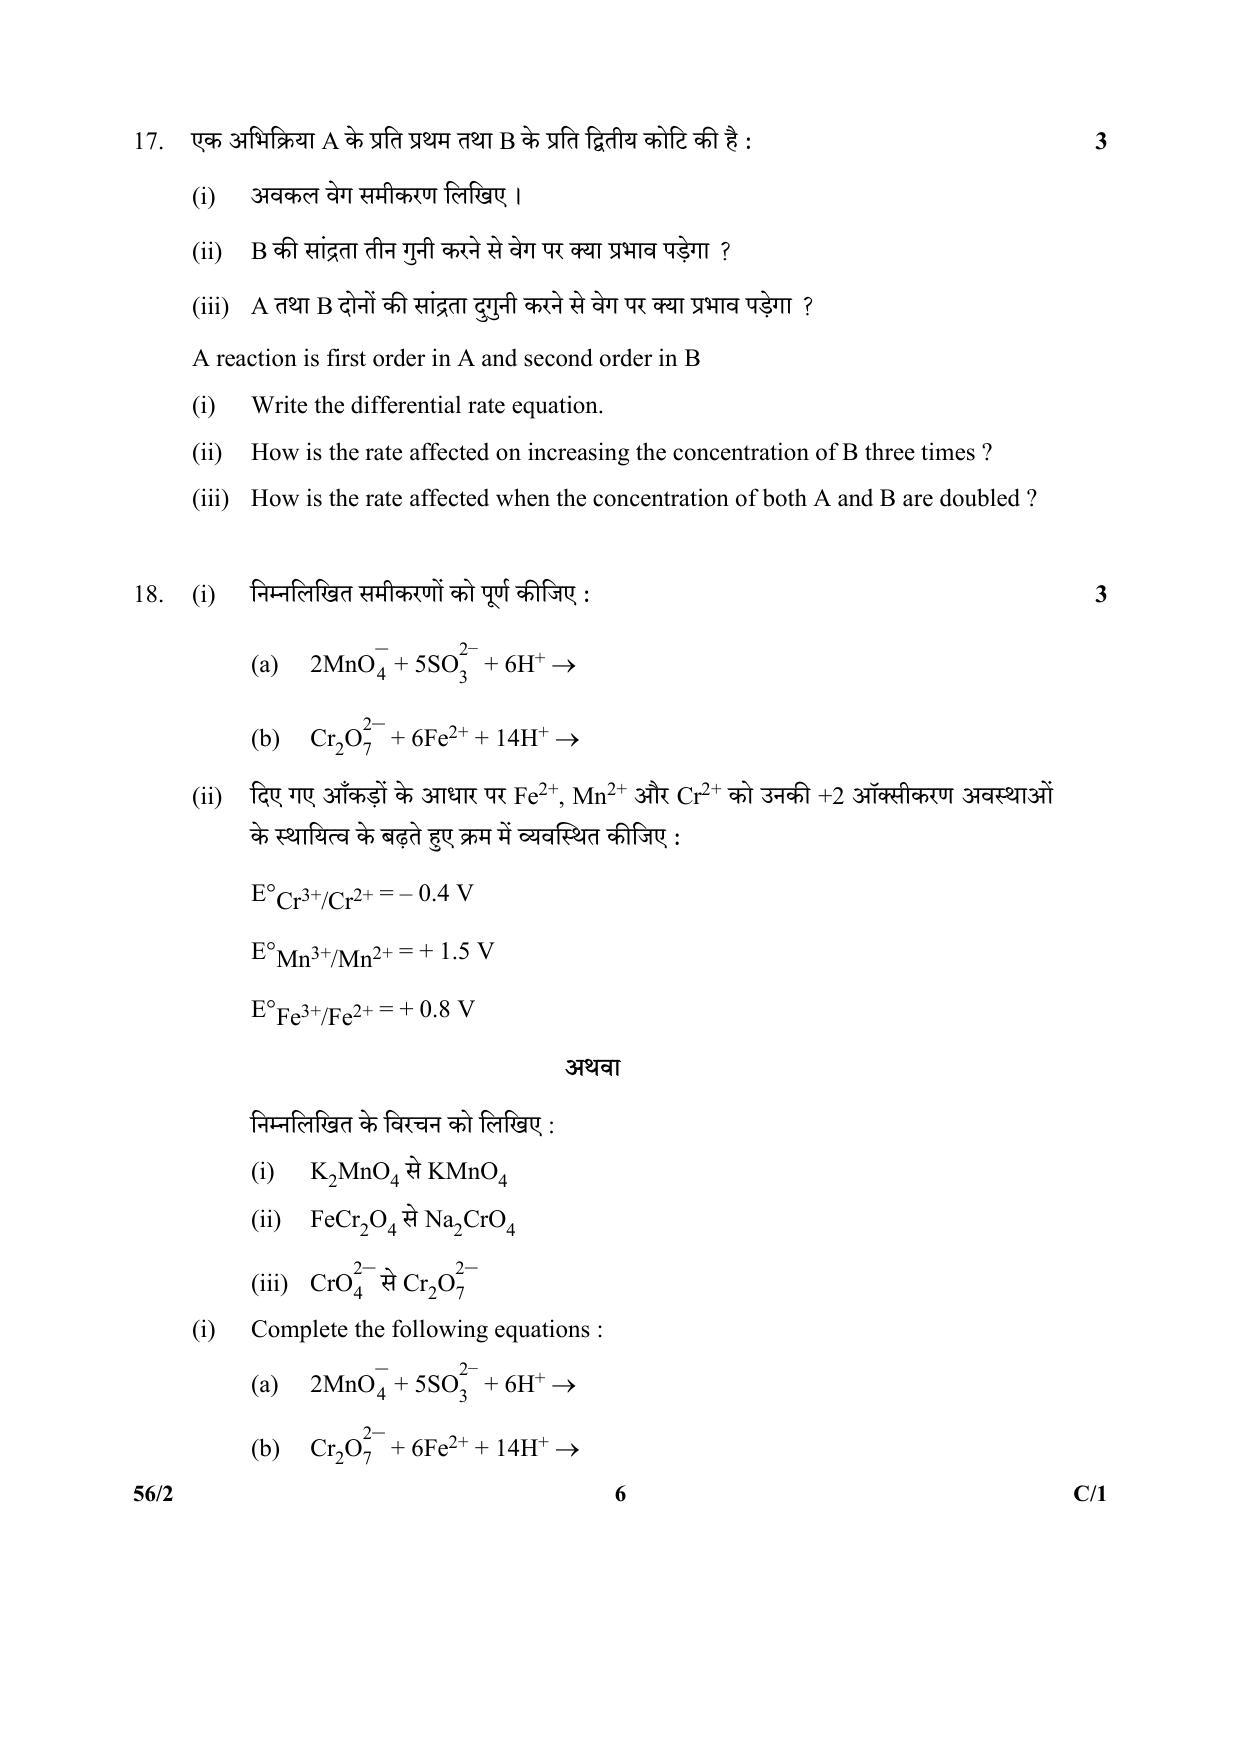 CBSE Class 12 56-2 (Chemistry) 2018 Compartment Question Paper - Page 6